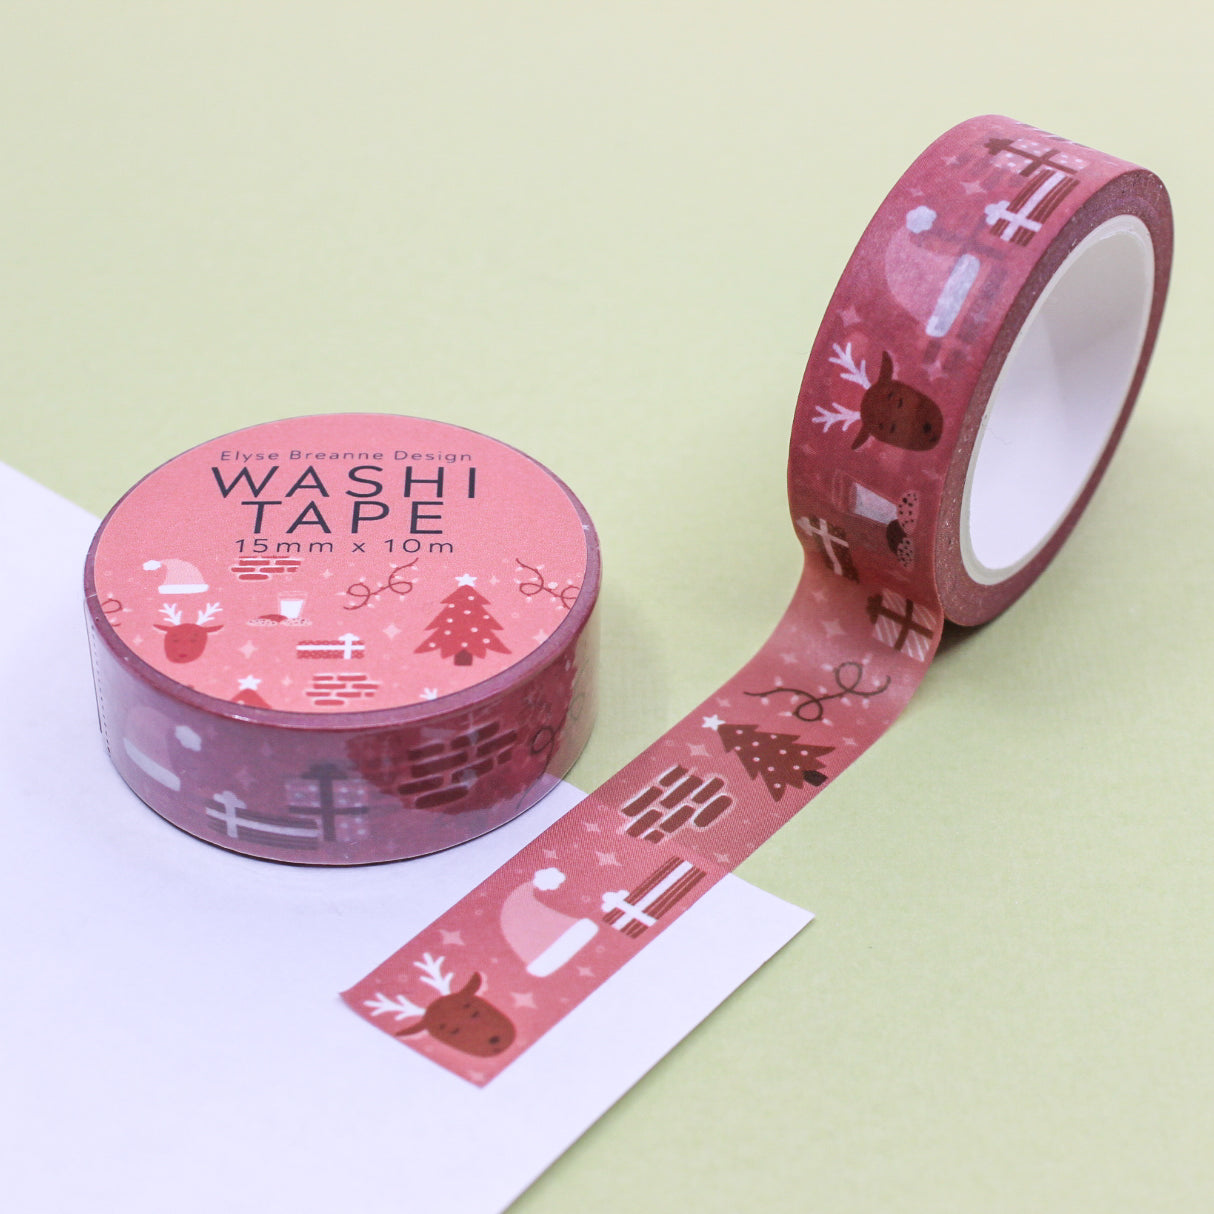 Christmas Chimney Holiday Objects Washi Tape, a delightful tape adorned with festive chimney scenes, stockings, and holiday decorations, adding a cozy and charming touch to your Christmas-themed projects. This tape is from Elyse Breanne Designs and sold at BBB Supplies Craft Shop.